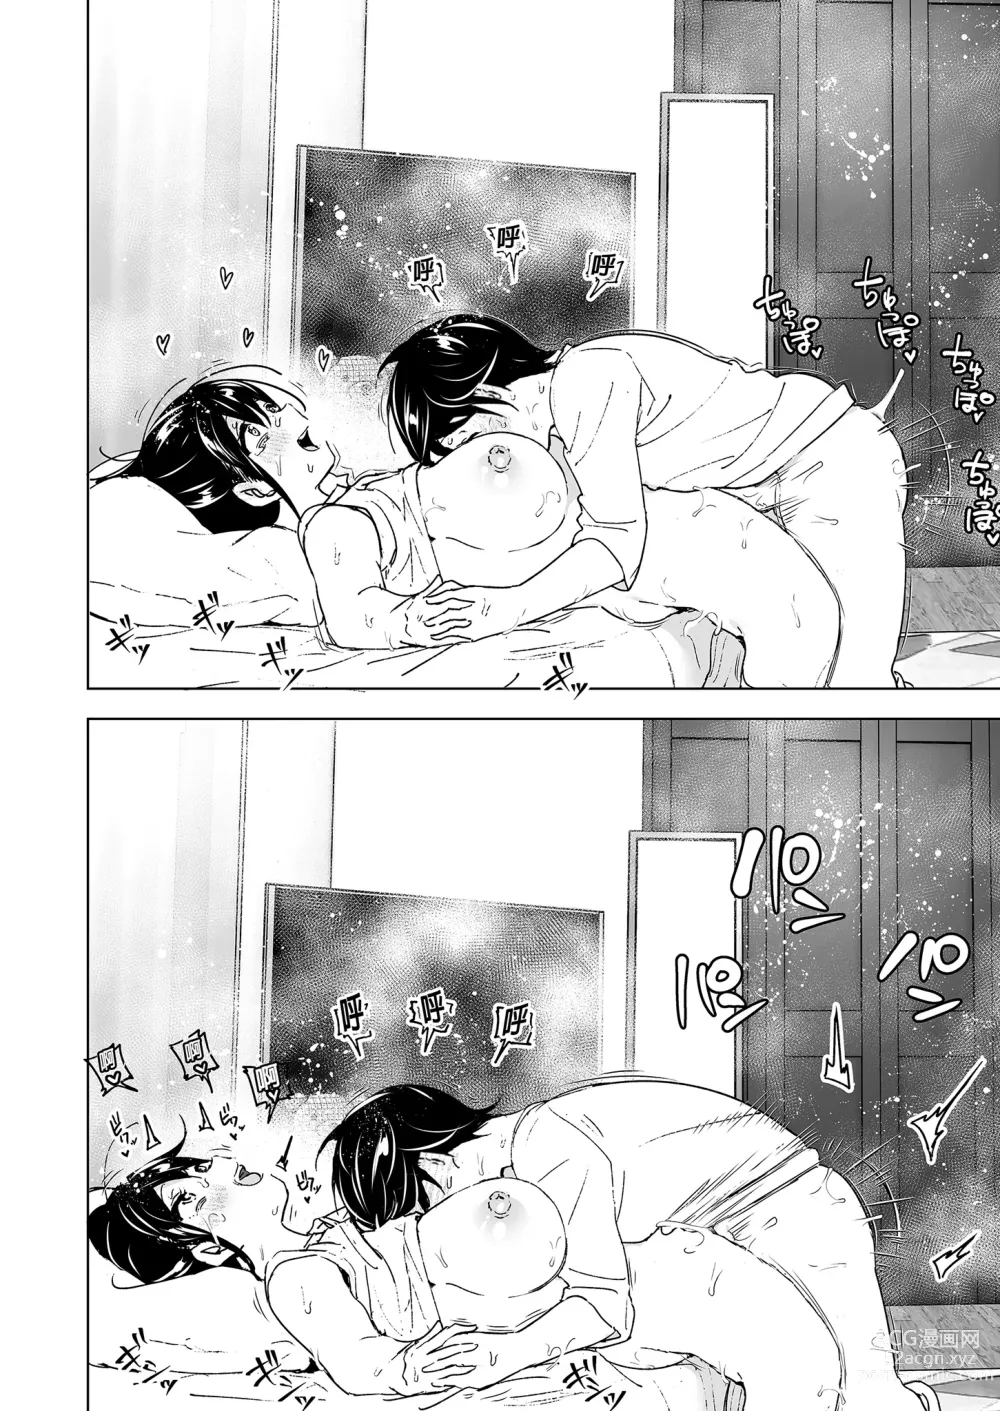 Page 64 of doujinshi 姊姊與傾聽怨言的弟弟